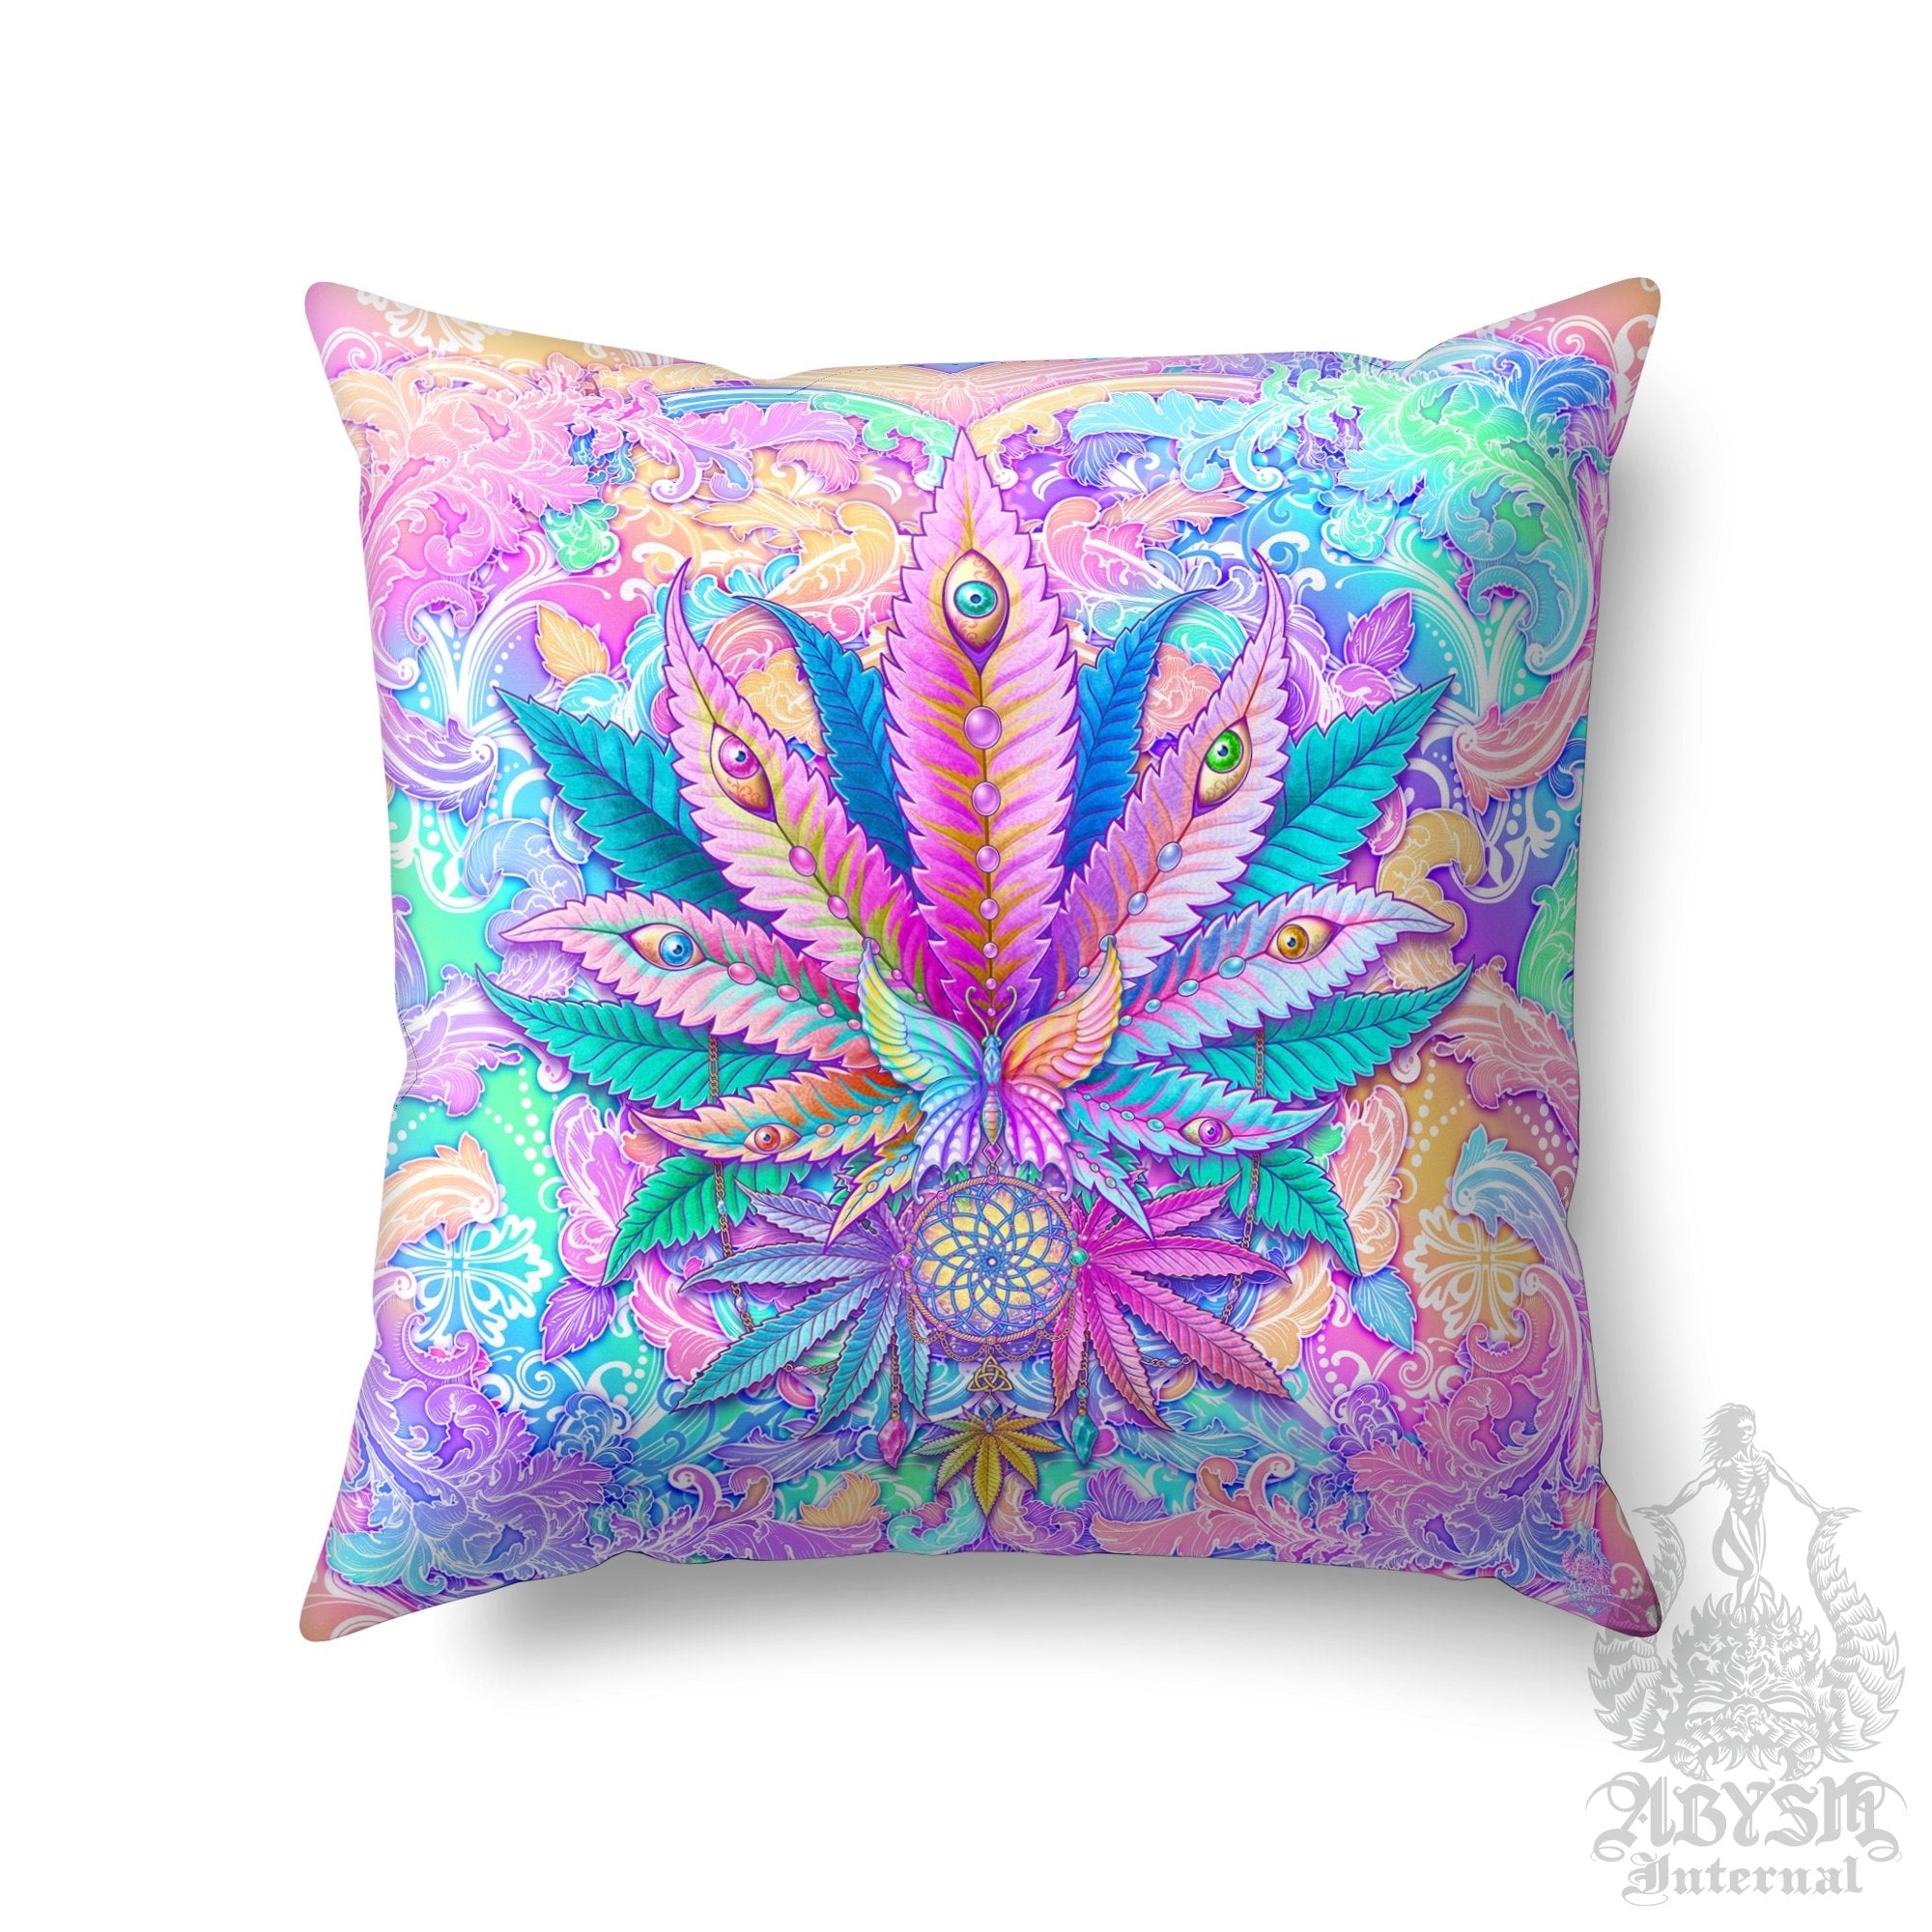 Weed Throw Pillow, Cannabis Shop Decor, Aesthetic Decorative Accent Cushion, Psychedelic Room Decor, Pastel 420 Art Print - Abysm Internal